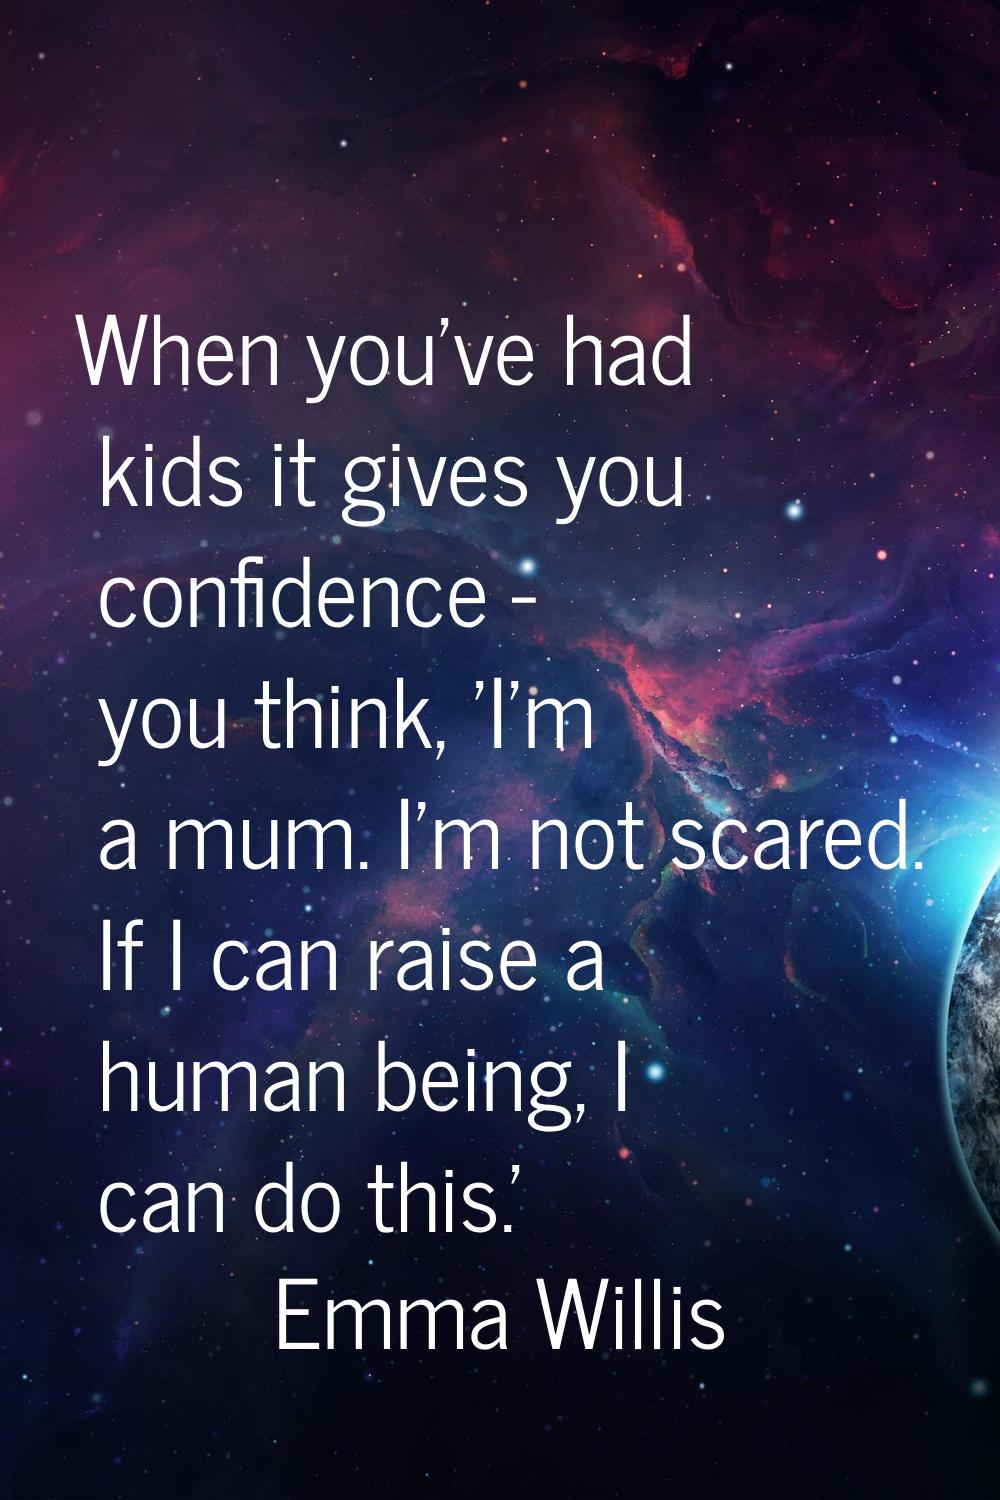 When you've had kids it gives you confidence - you think, 'I'm a mum. I'm not scared. If I can rais